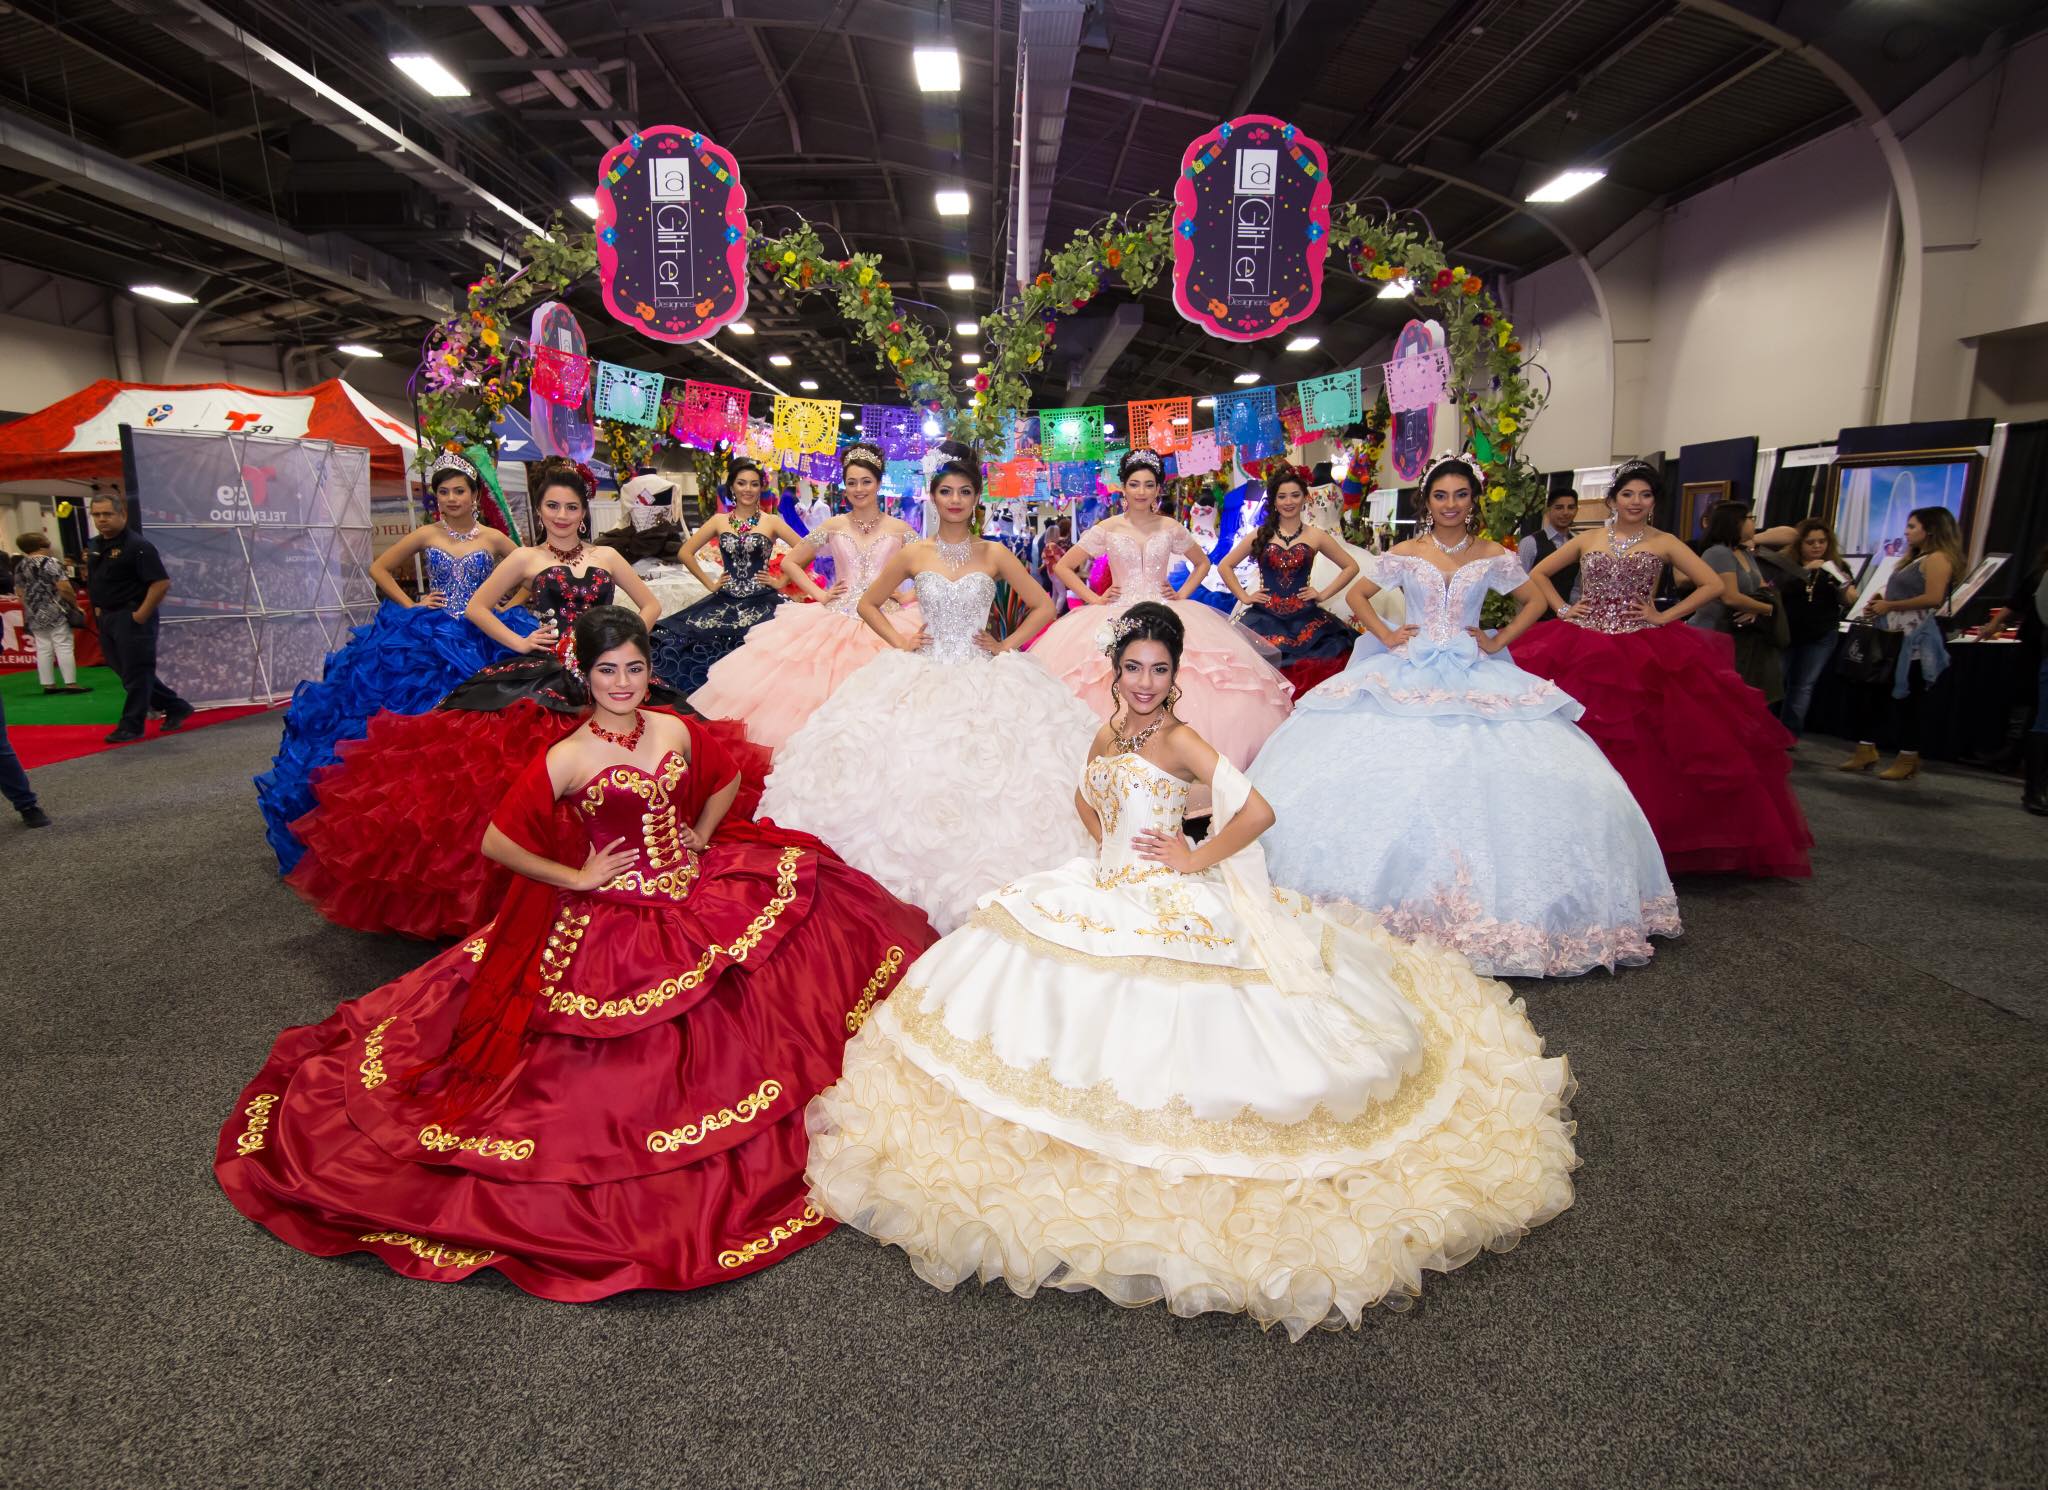 Quinceanera Dress Shops A Staple Of Santa Ana Are Leaving A Changing Downtown Los Angeles Times